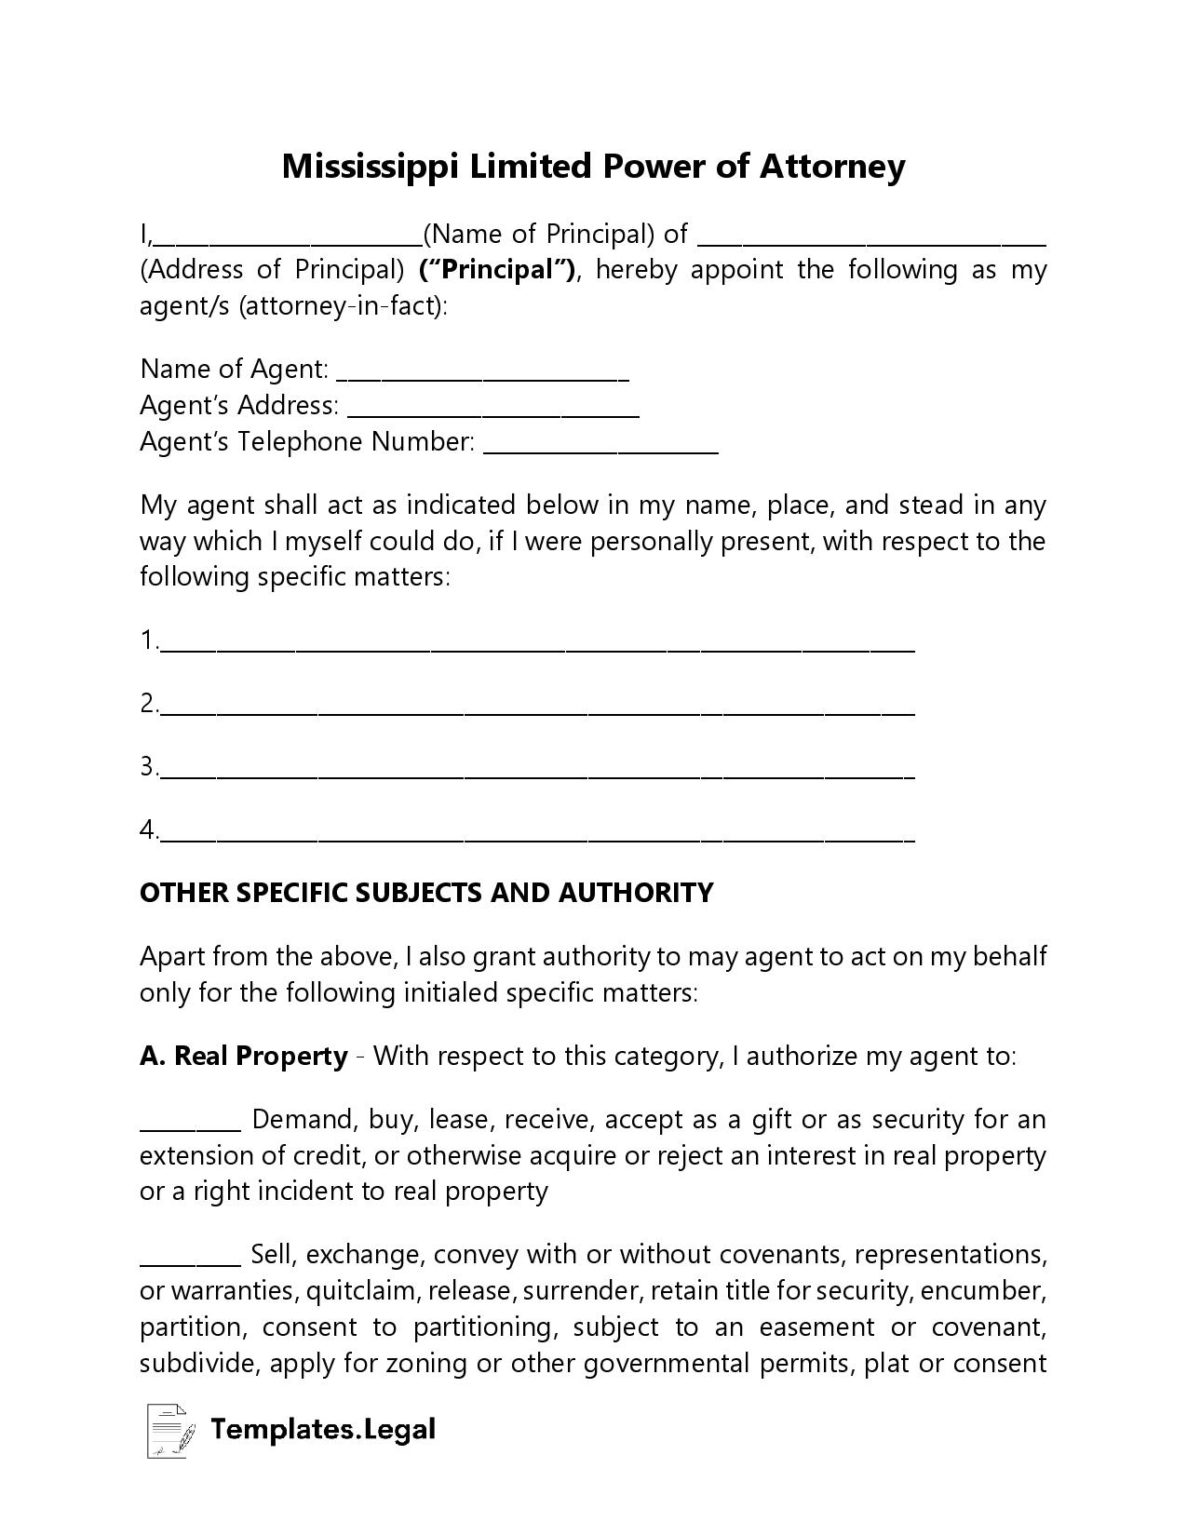 mississippi-power-of-attorney-templates-free-word-pdf-odt